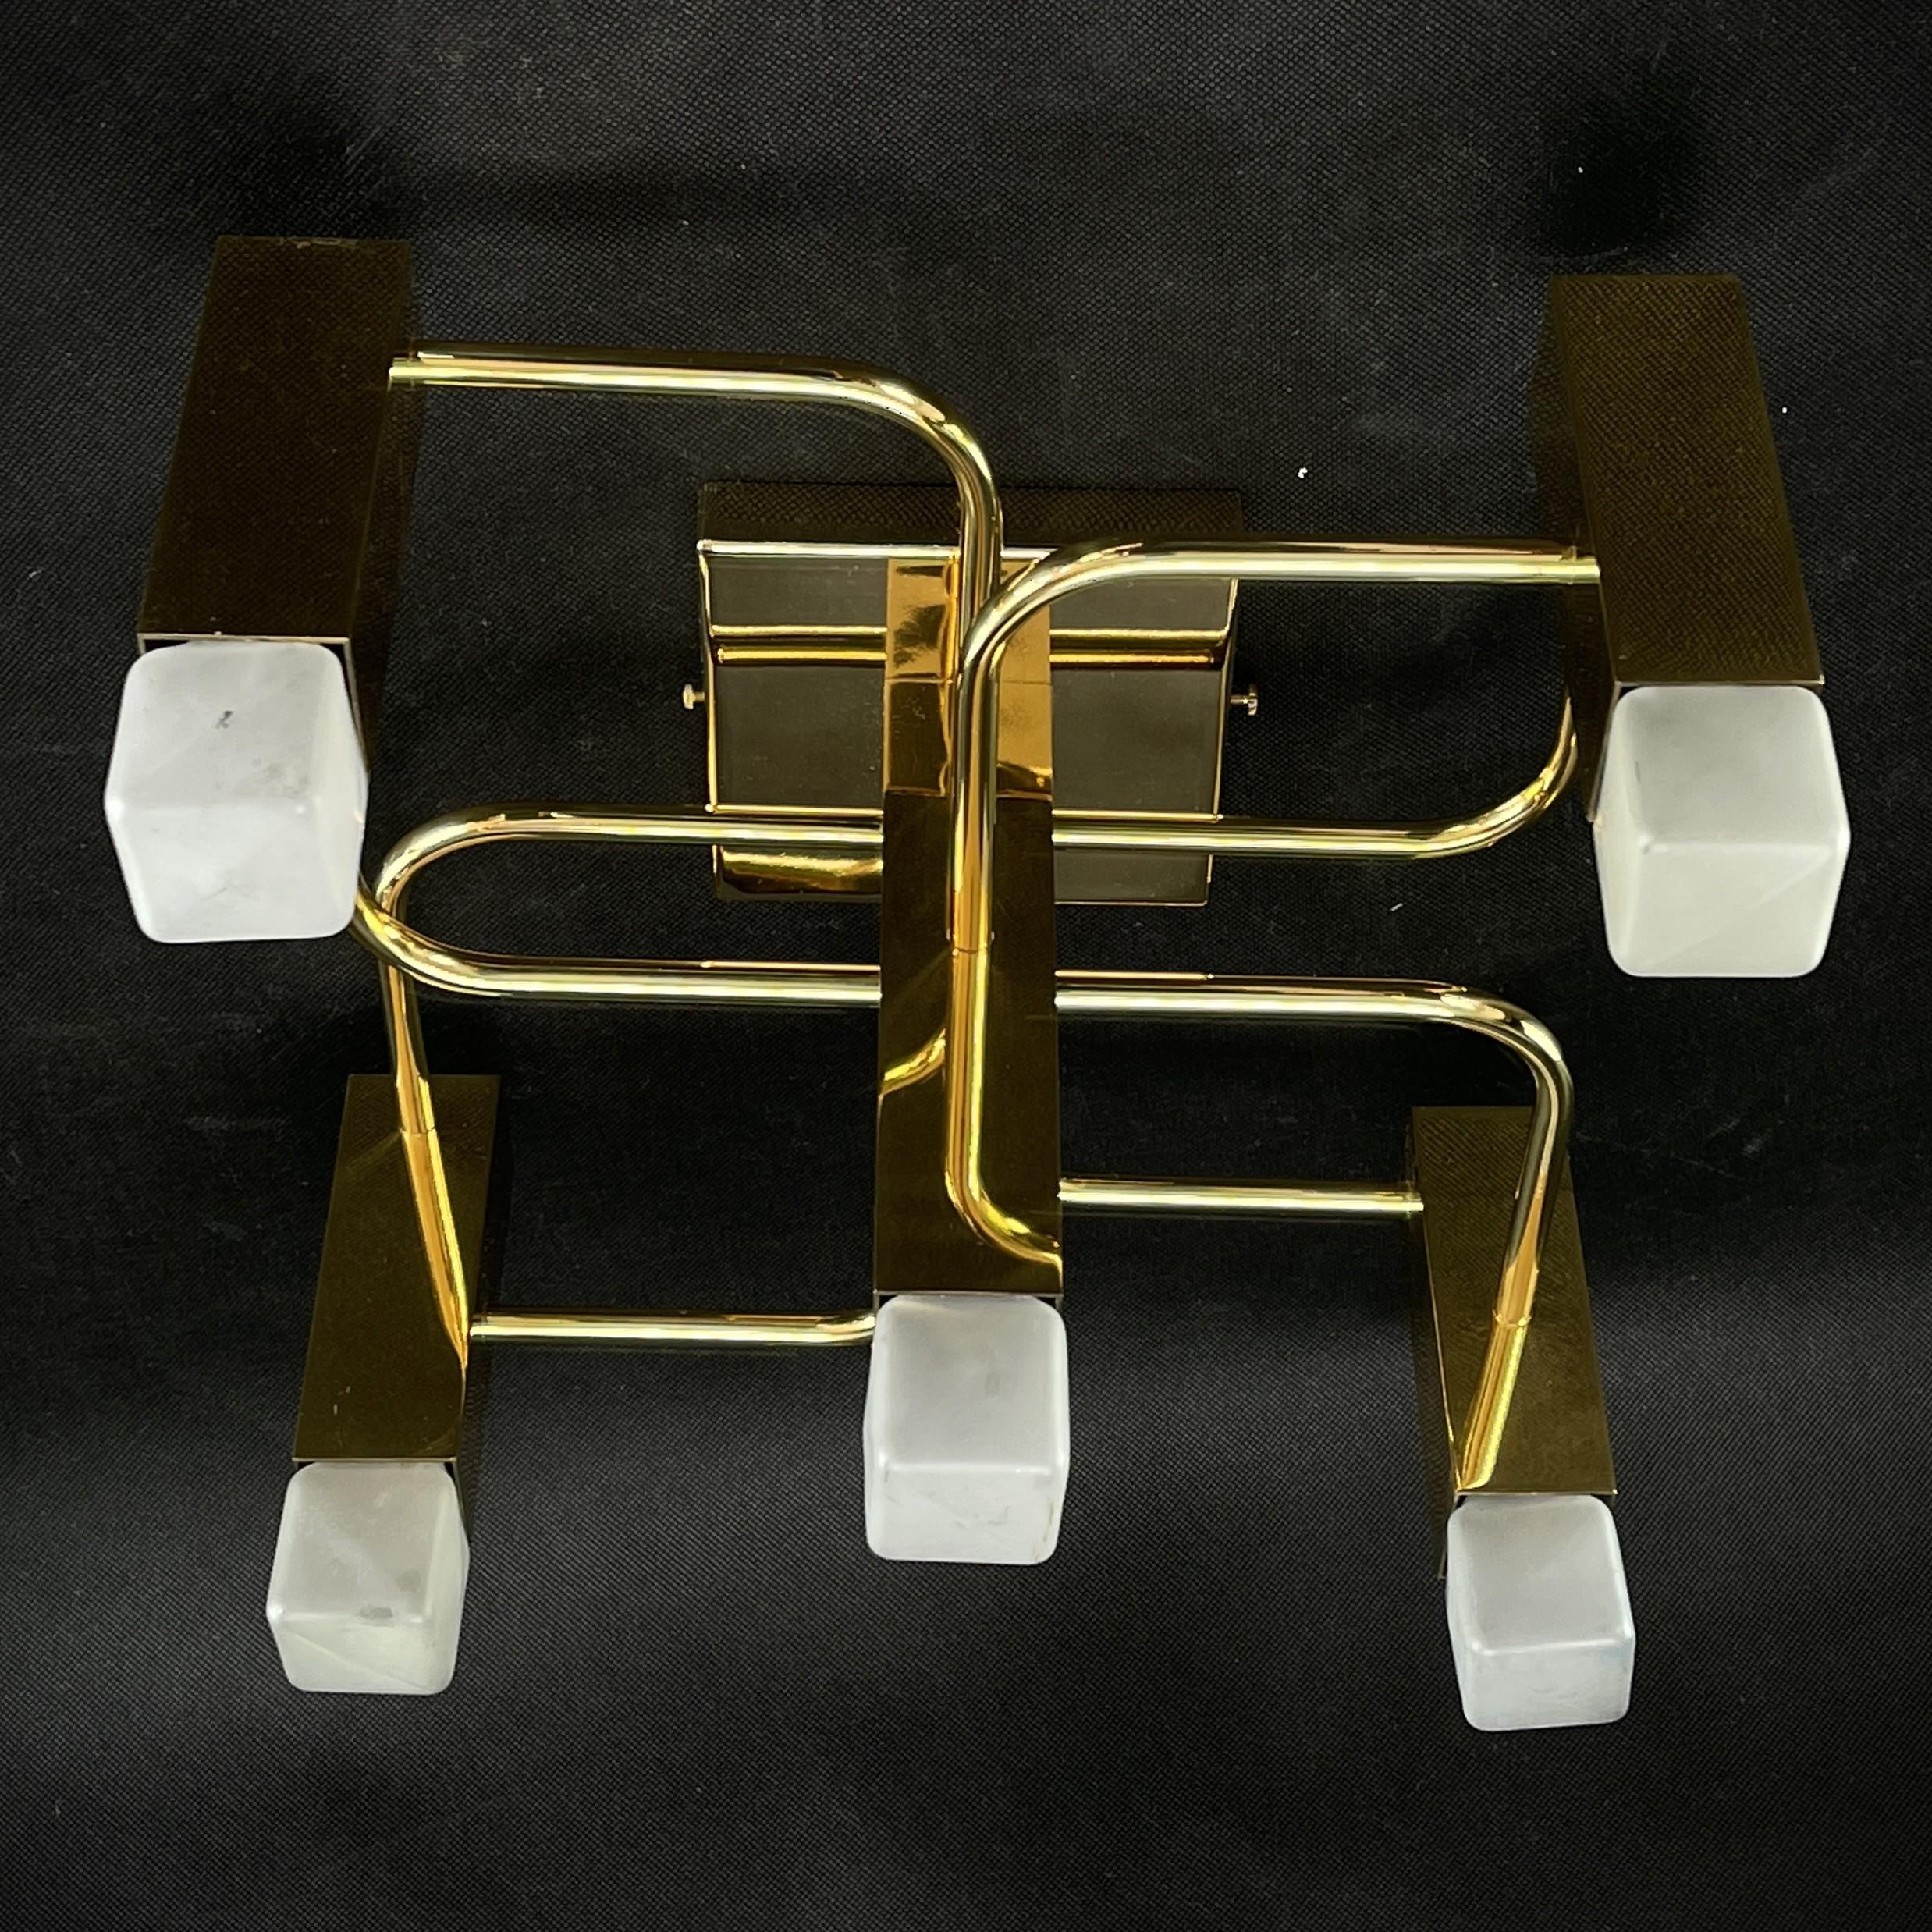 Vintage Ceiling Lamp by Gaetano Sciolari - 1970s

The golden ceiling lamp by Gaetano Sciolari, made in 1970, is a truly iconic piece of modern lighting art. The designer, known for his groundbreaking work in the field of lighting, has created a